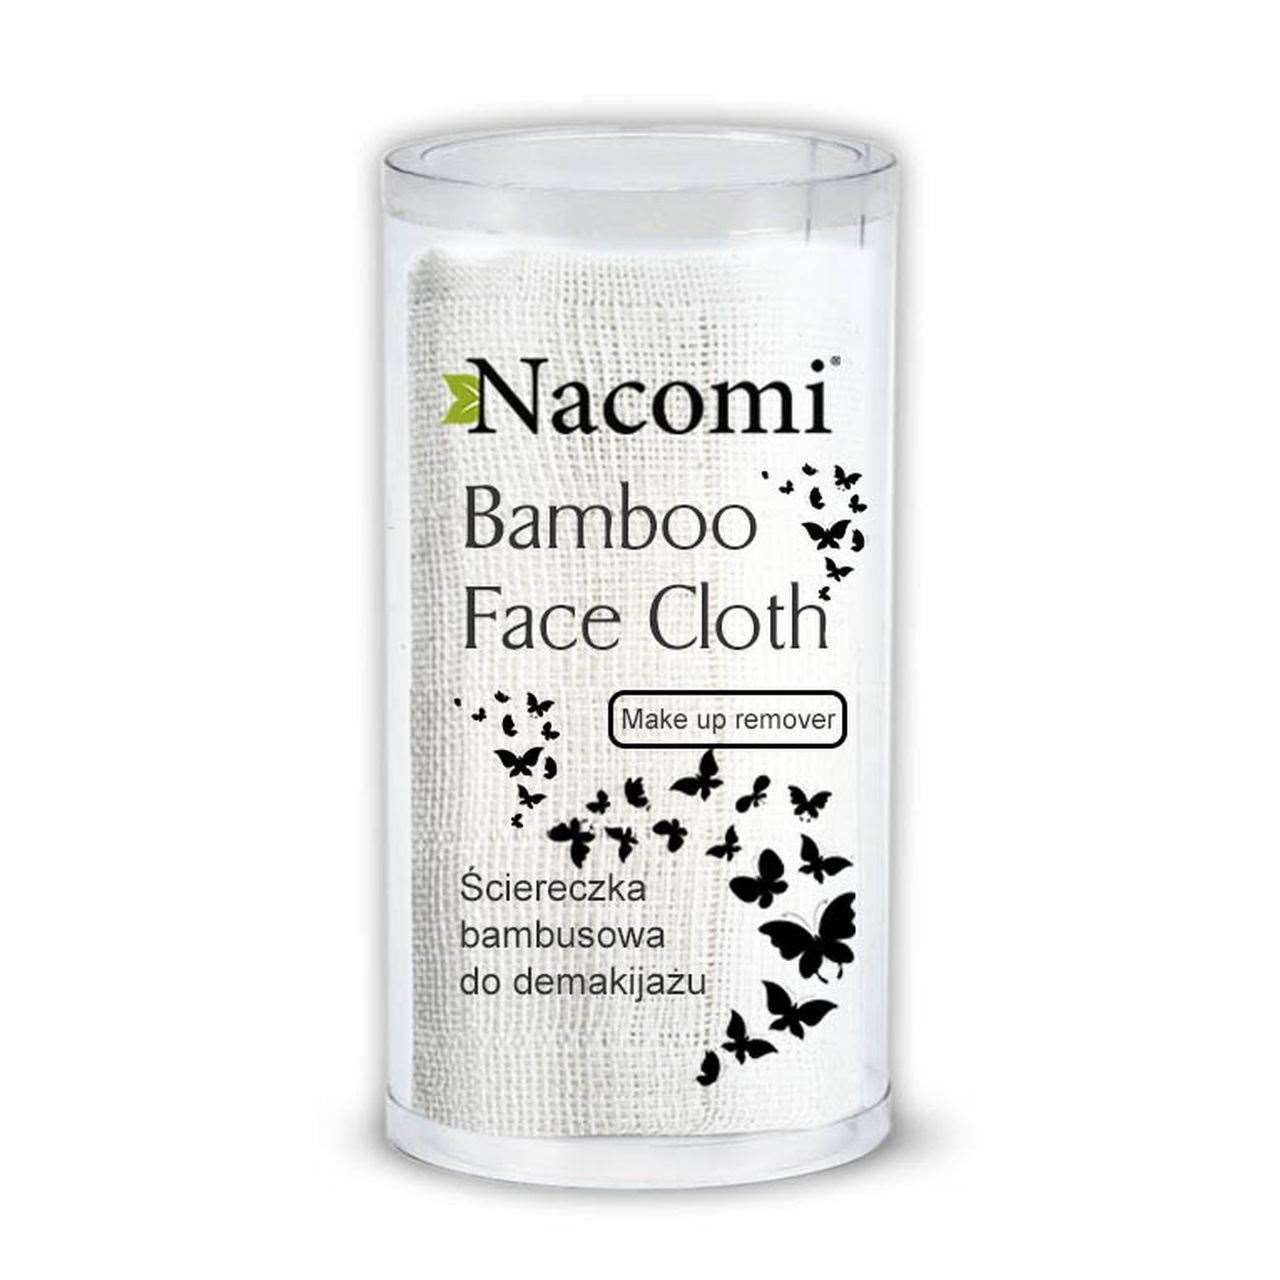 Bamboo Face Cloth for Makeup Remover